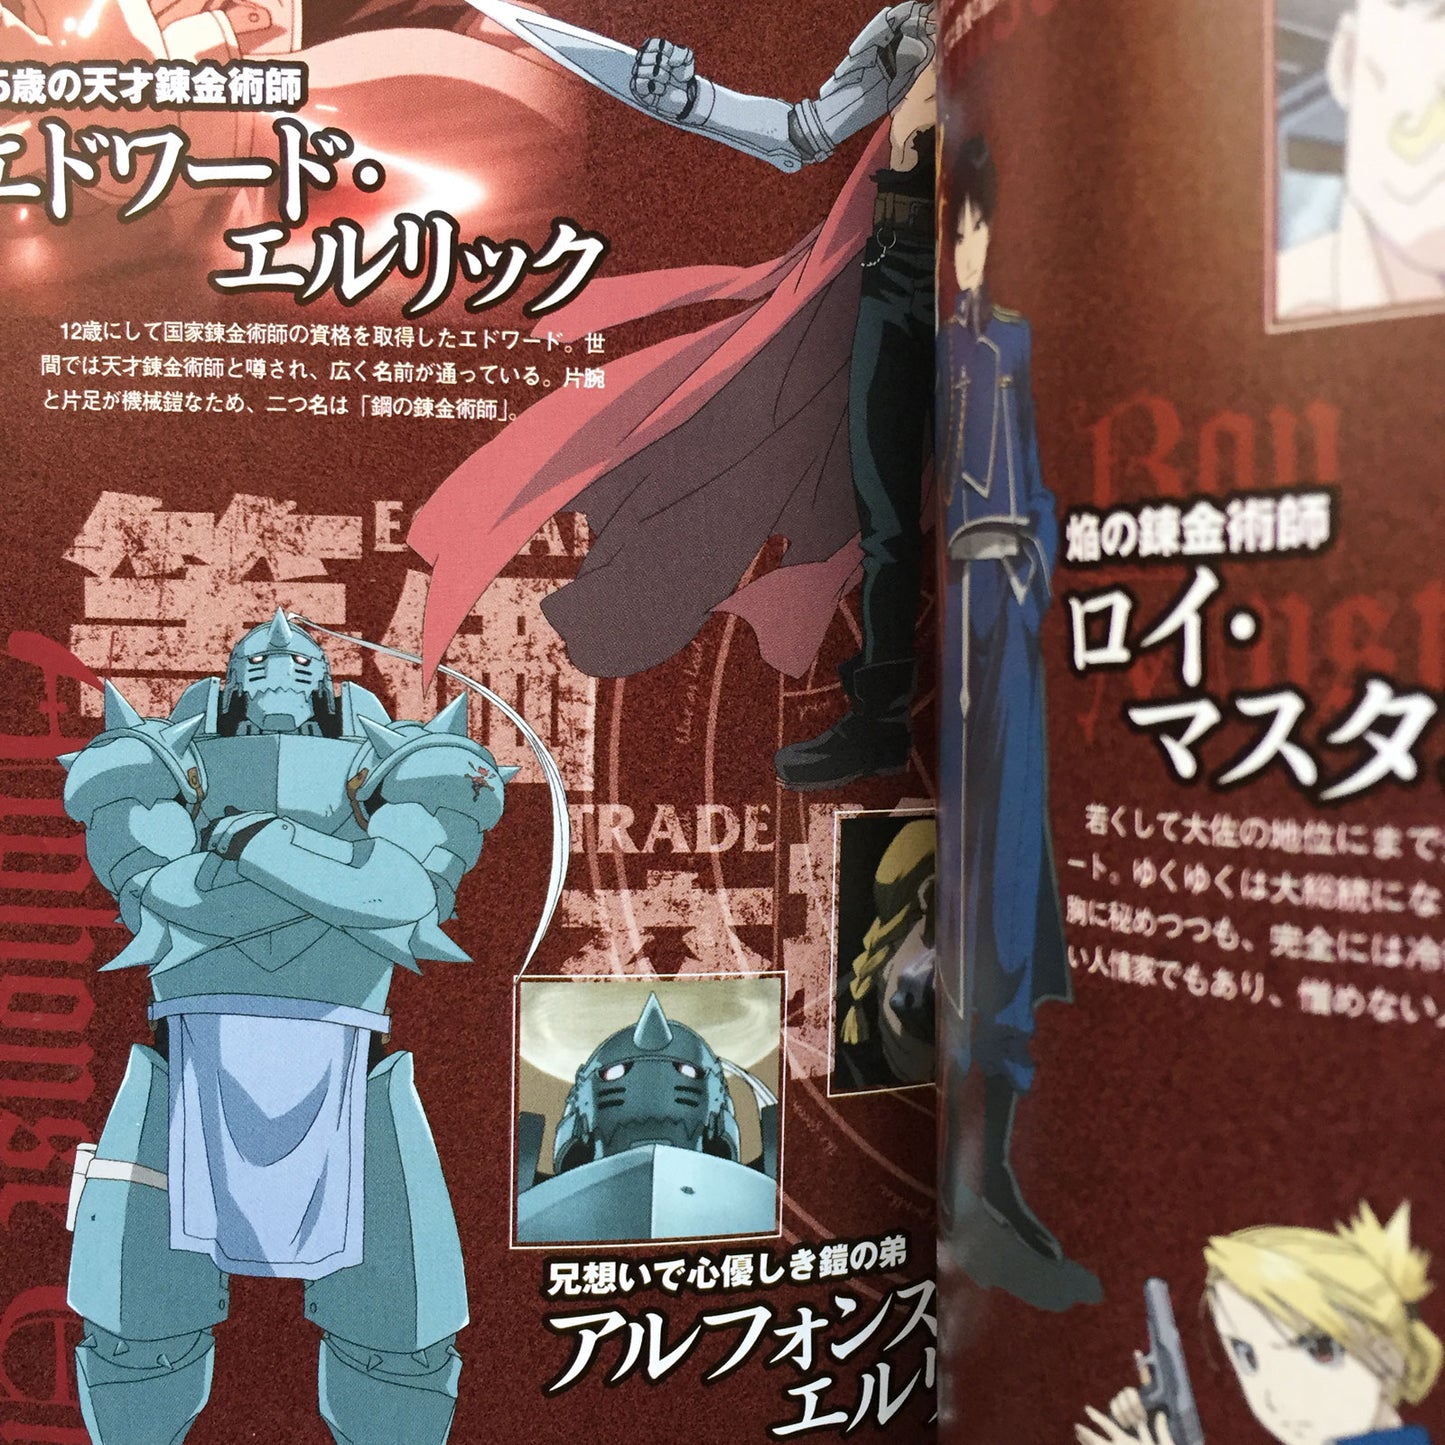 Fullmetal Alchemist and the Broken Angel Official Complete Guide